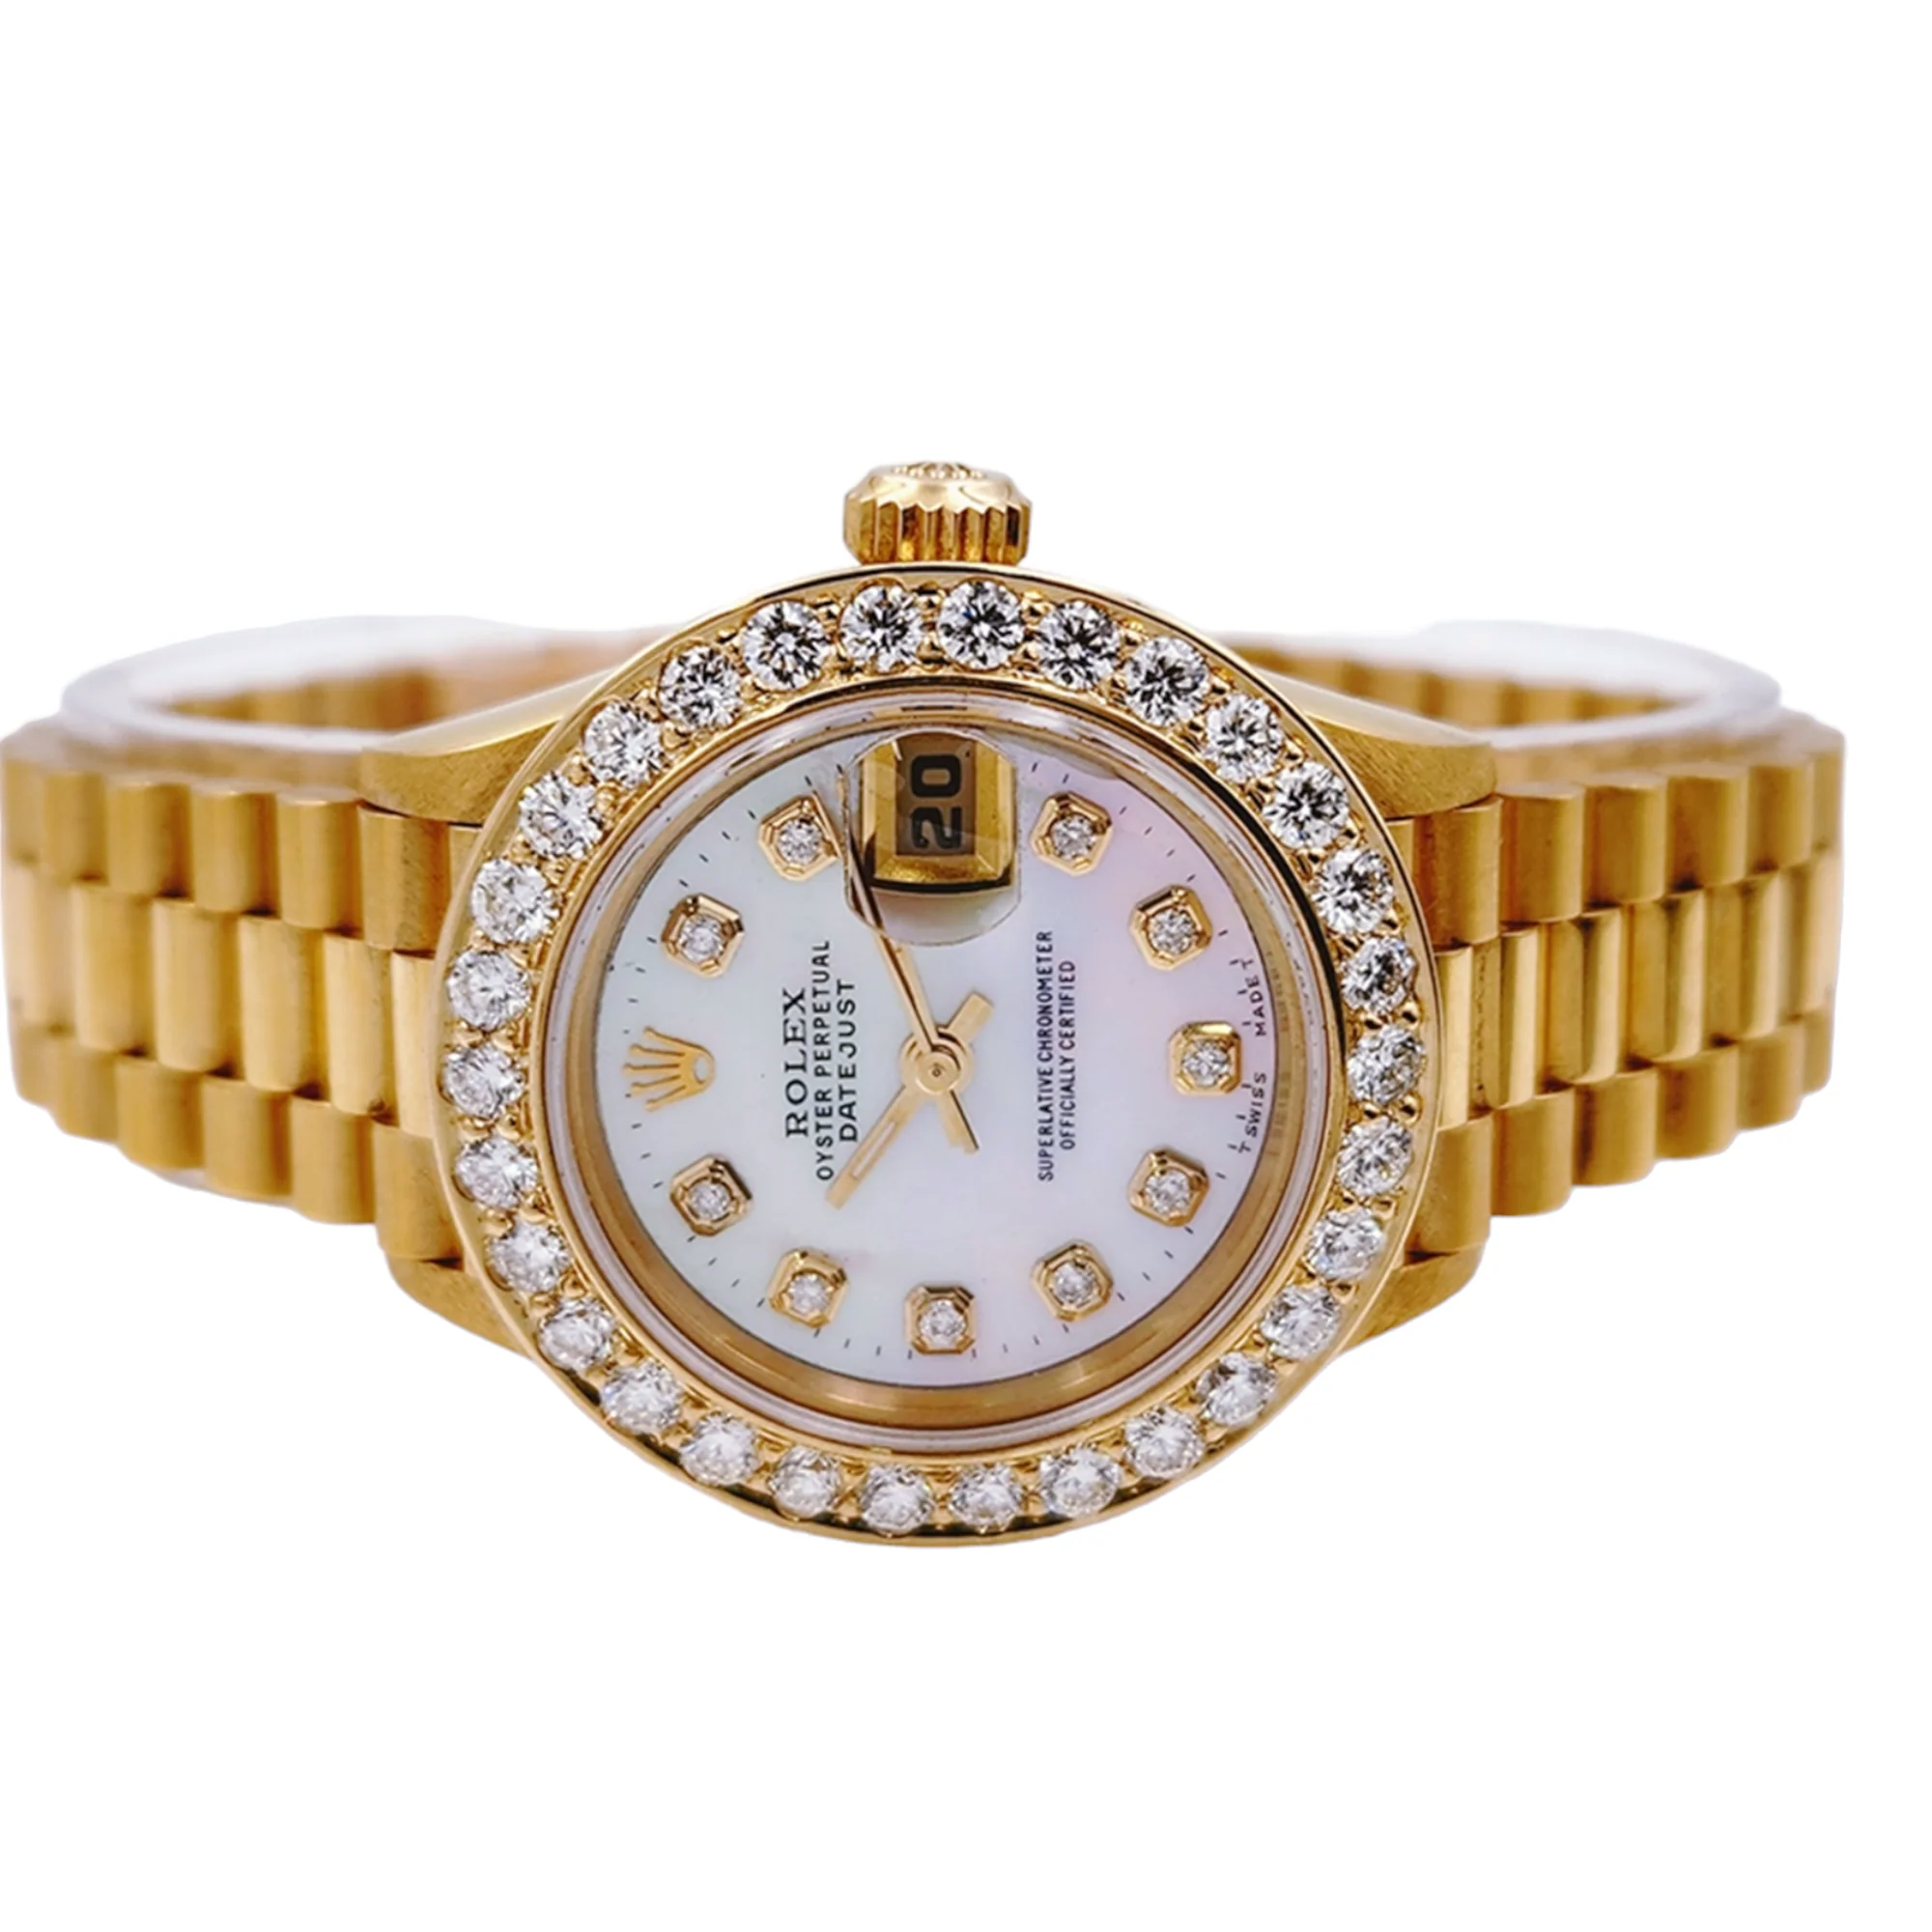 Ladies Rolex 26mm Presidential 18K Solid Yellow Gold Watch with Mother of Pearl Diamond Dial and 2CT. Diamond Bezel. (NEW 69178)